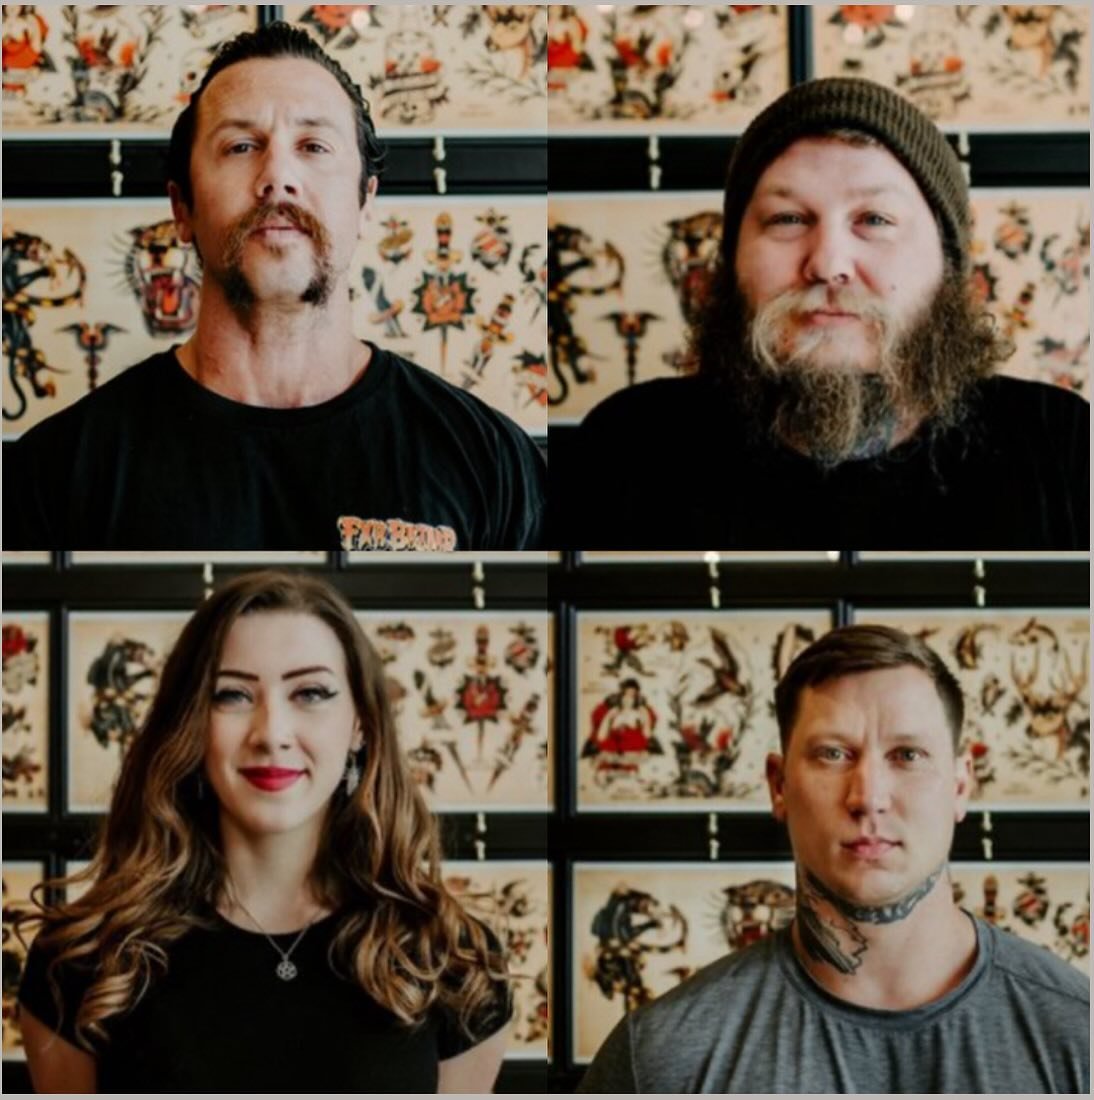 Team @twosonstattoo follow all 4 of our tattooers on their own IG pages @paulboschtattoo @willpaultattoos @sknapp_ink @twangsaw